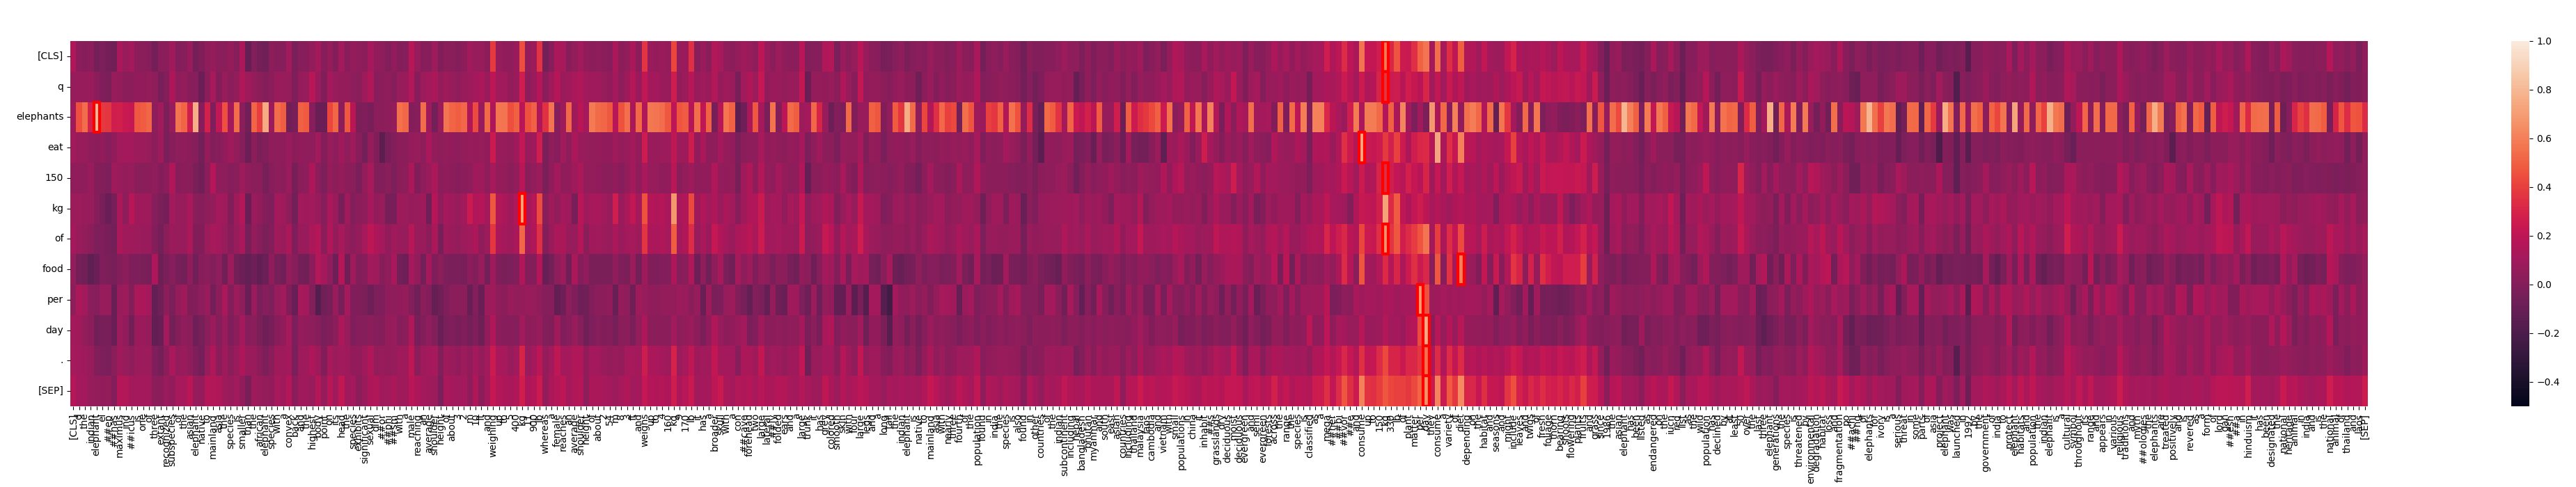 Graphical heatmap displaying genetic data, with red and orange dots indicating varying expression levels across base pairs an